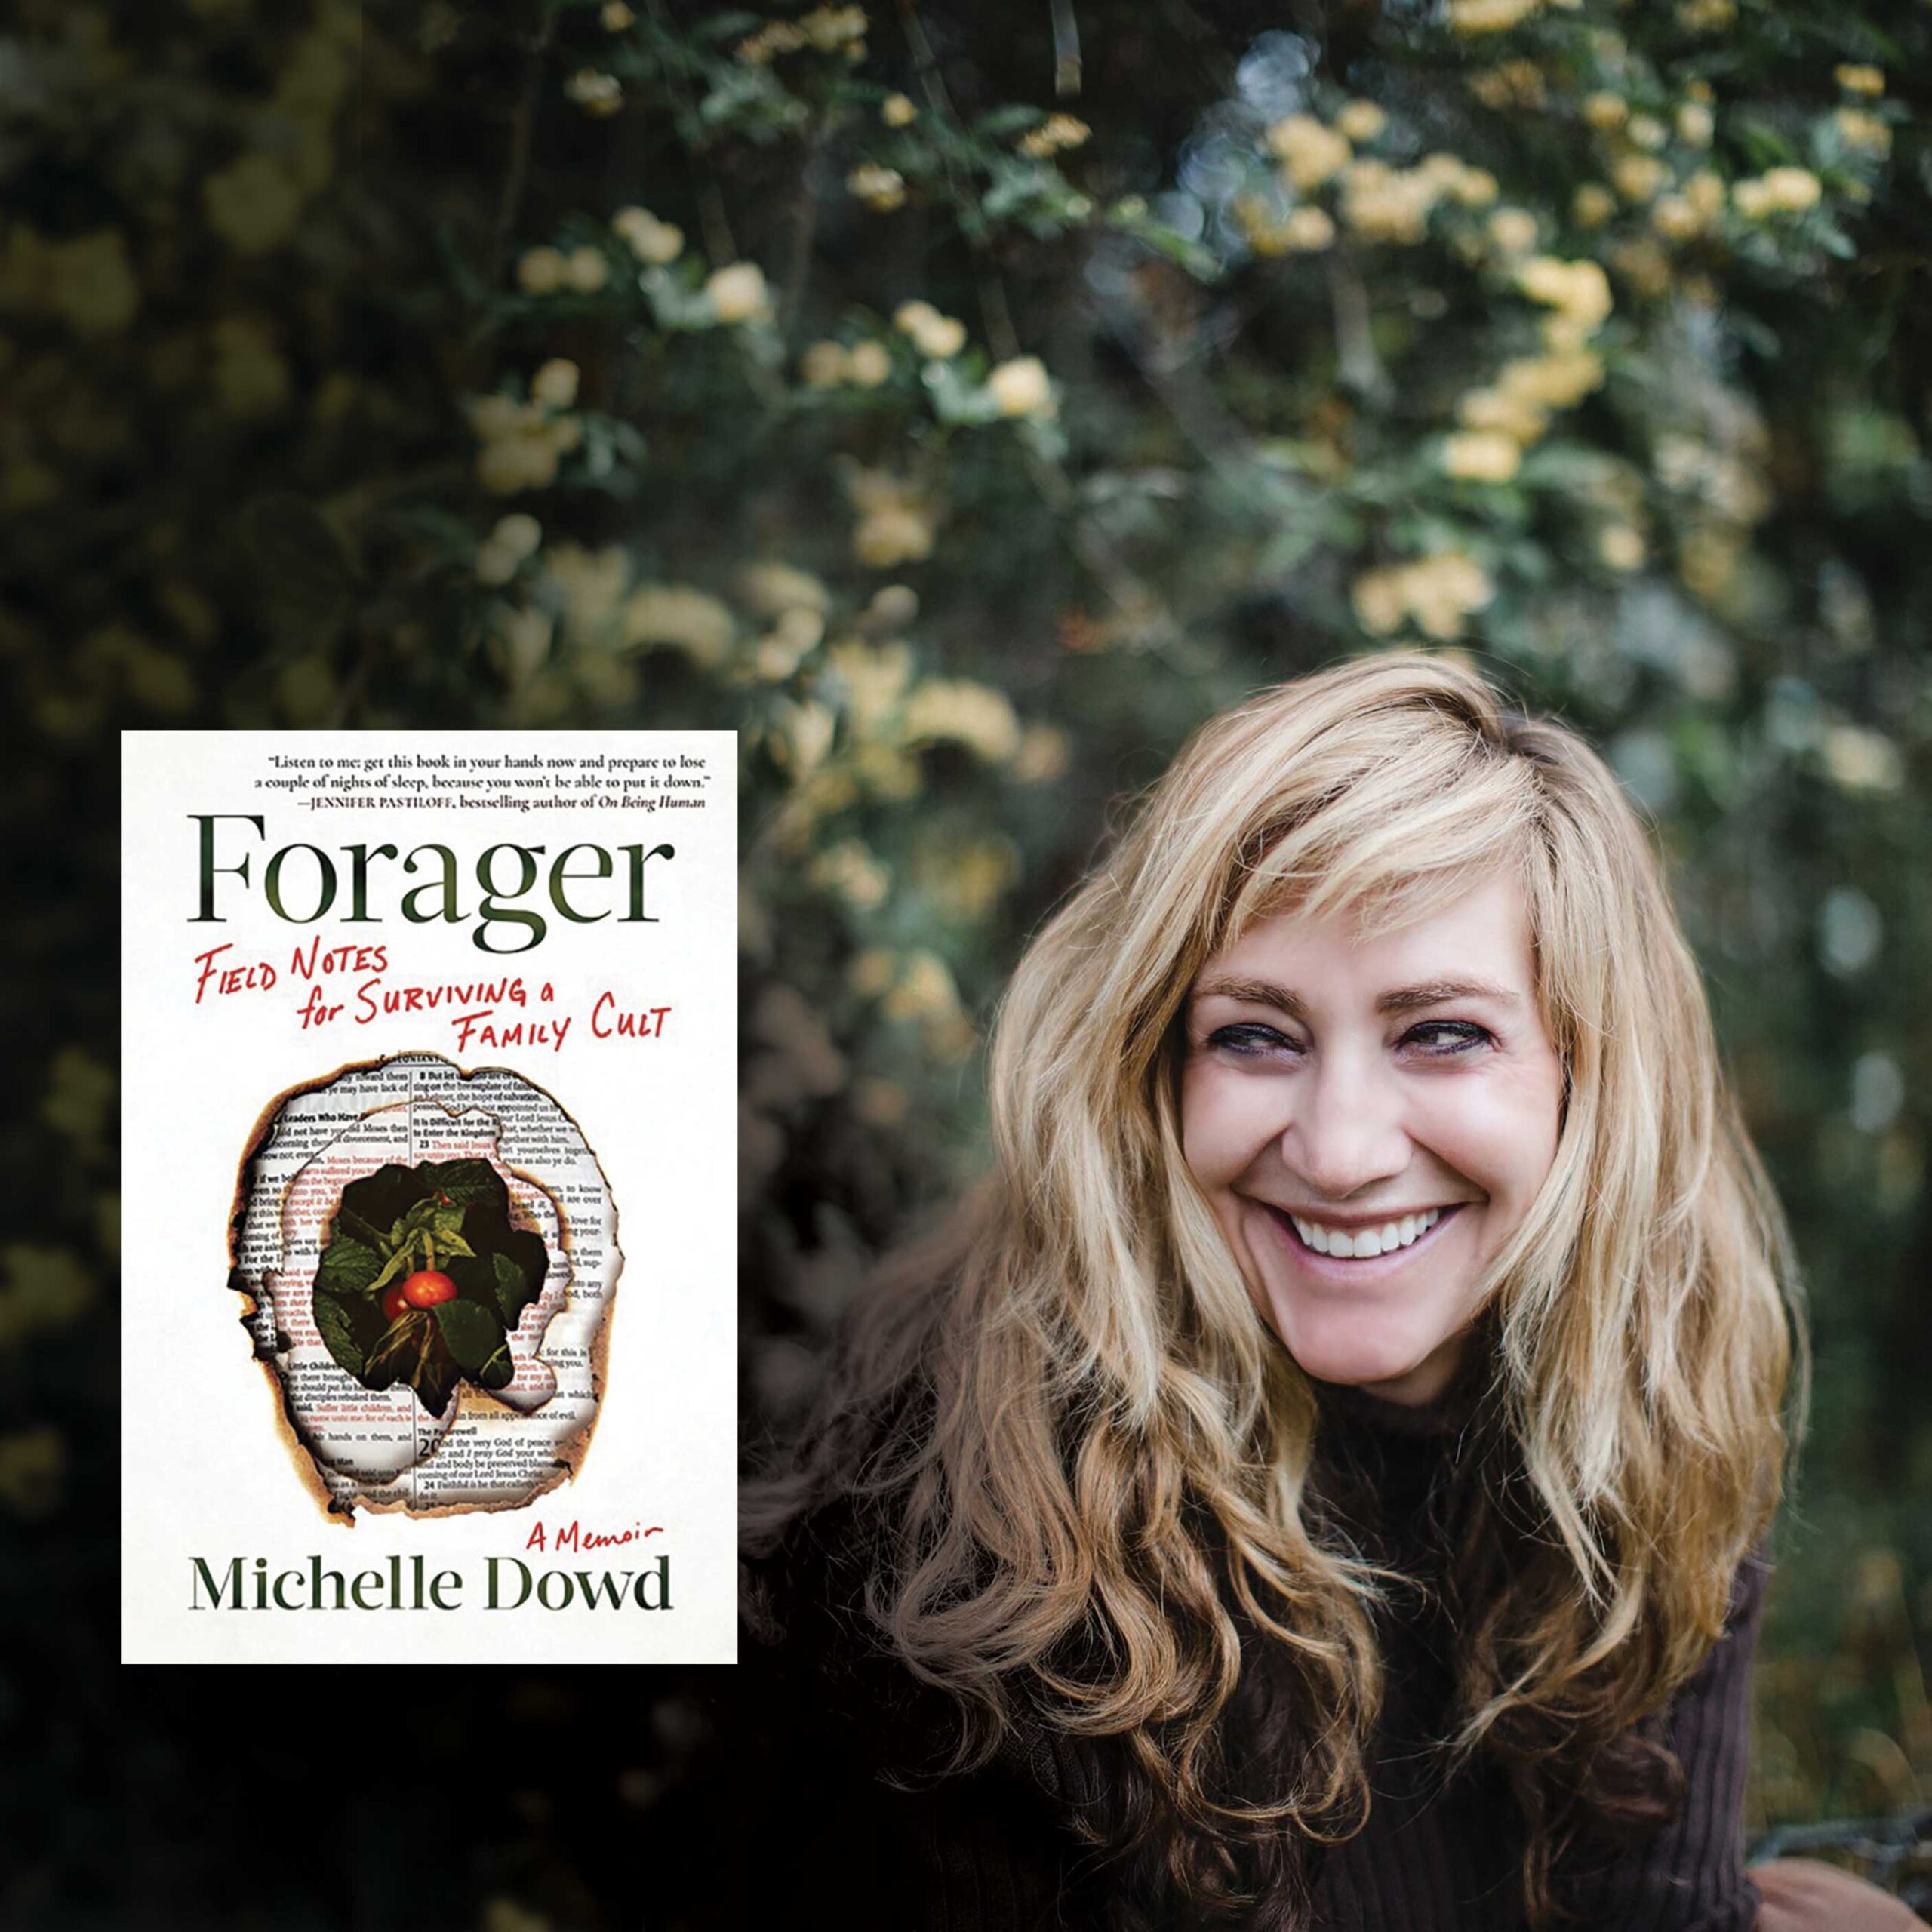 Michelle dowd and Forager book cover